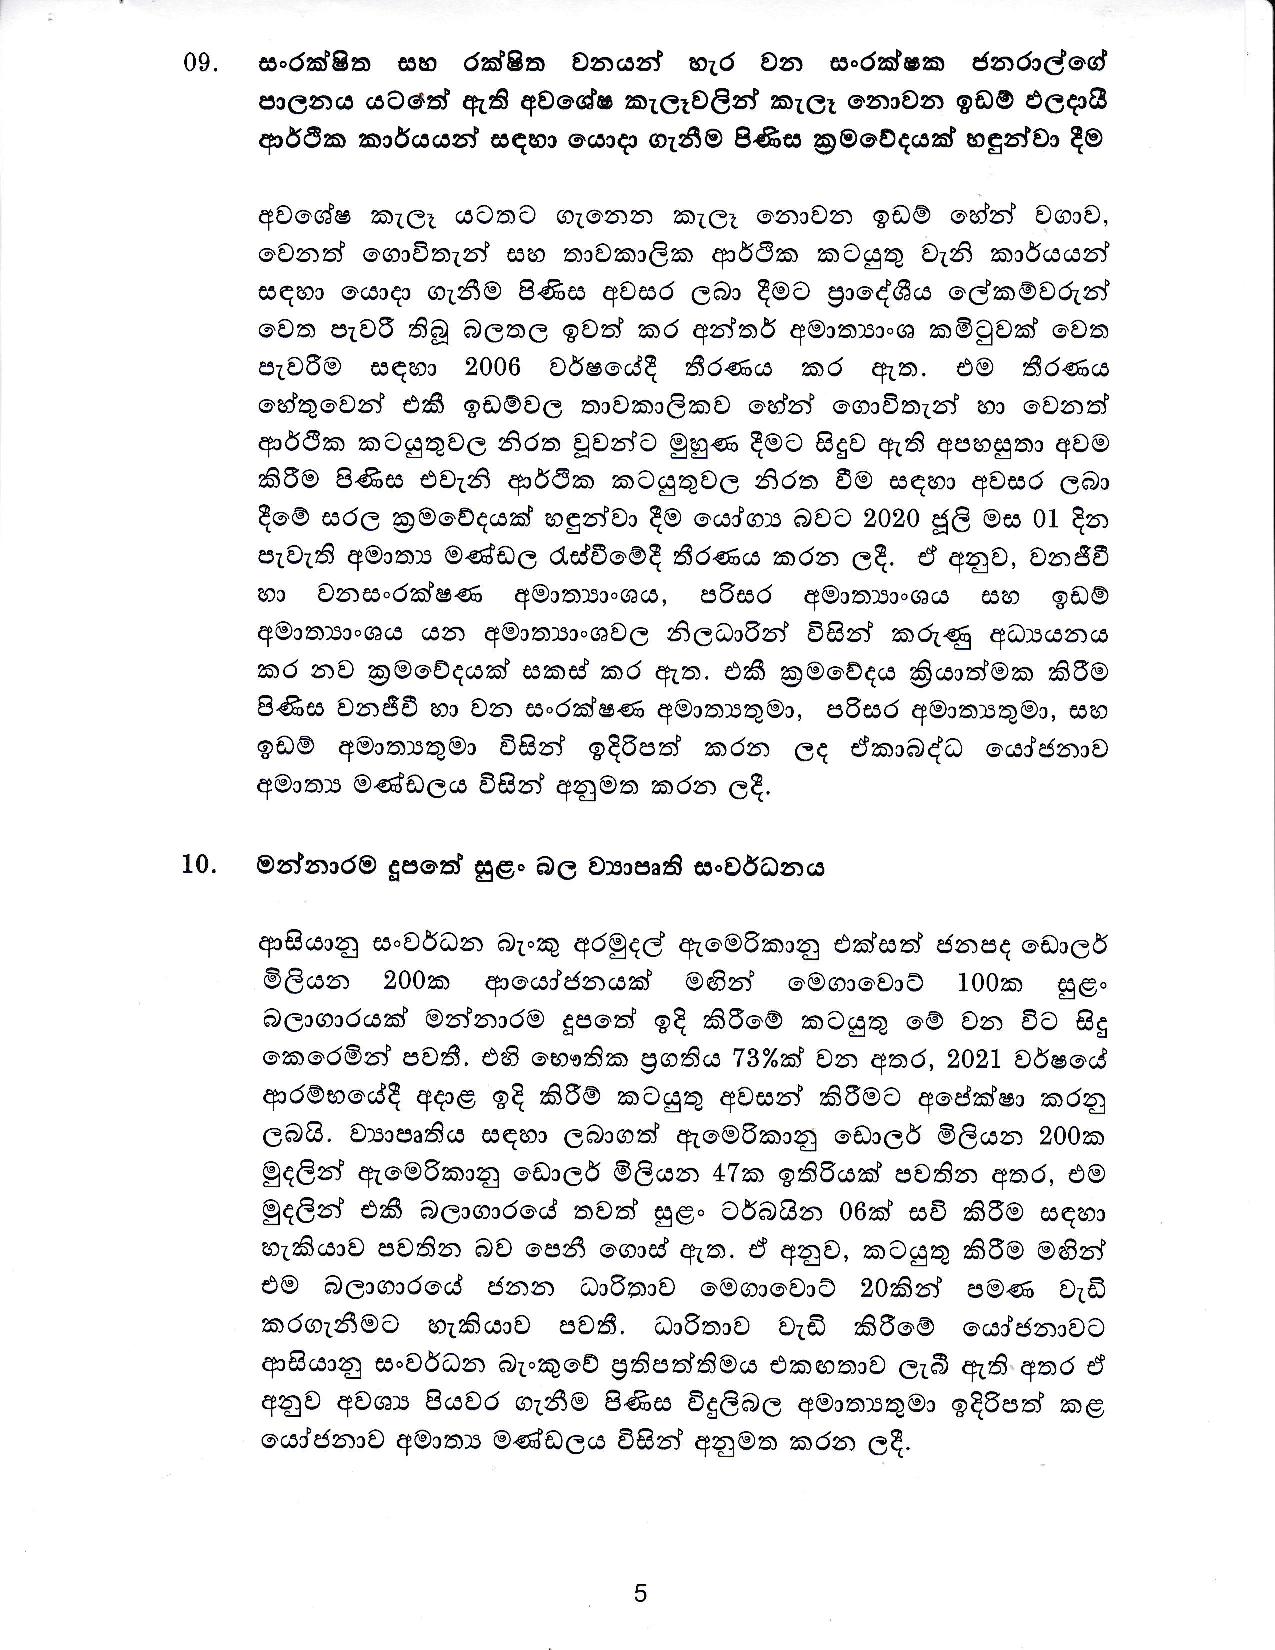 Cabinet Decision on 26.10.2020 page 005